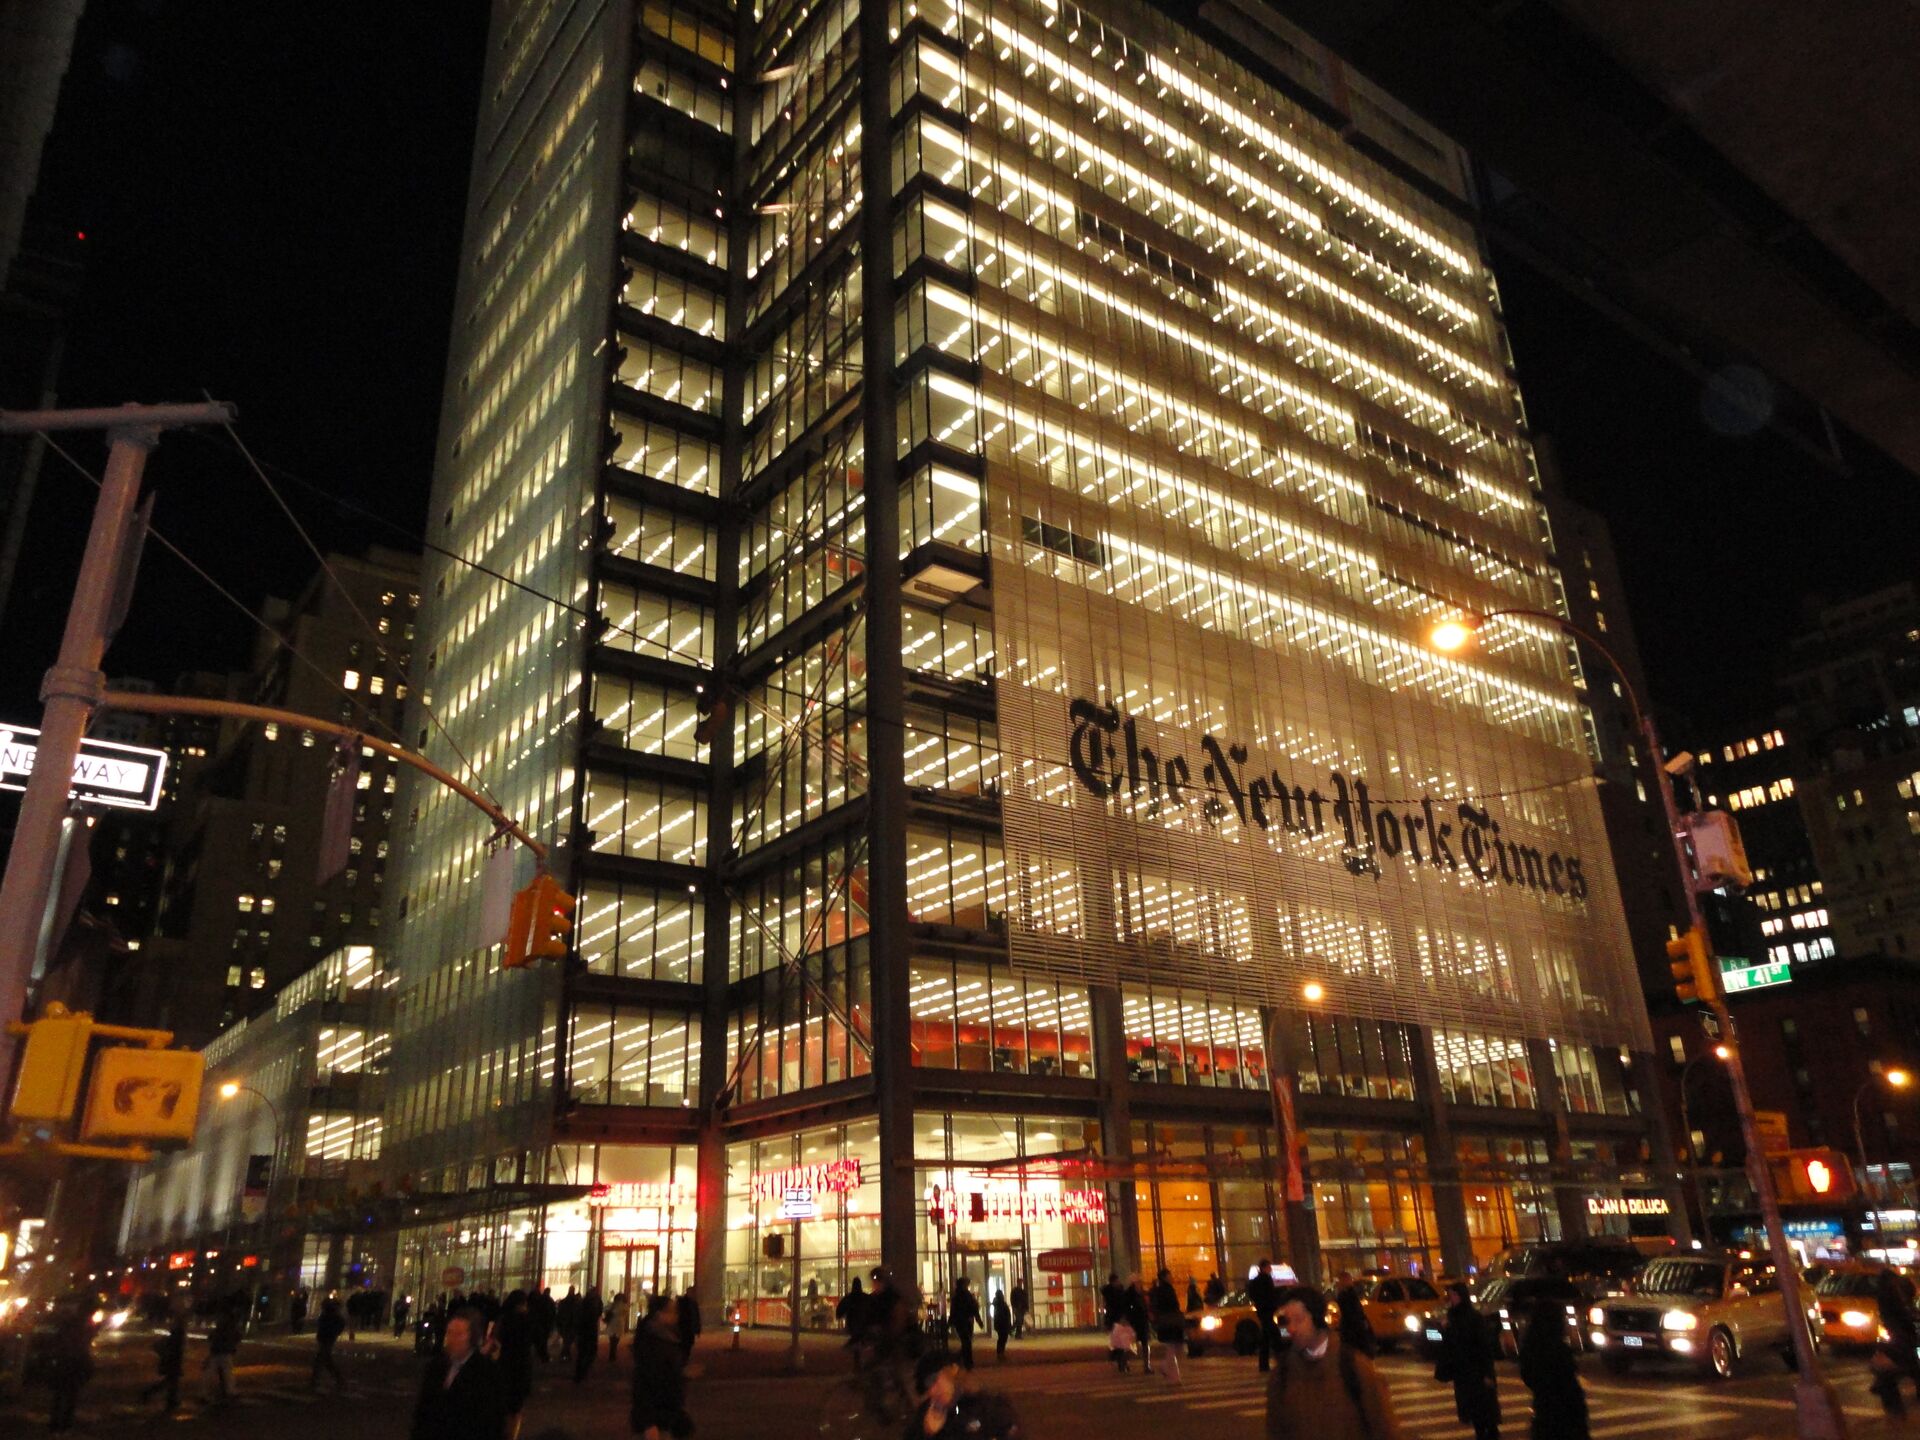 Biden's Justice Department Issued Gag Order on New York Times Execs Over Email Logs, Report Says - Sputnik International, 1920, 05.06.2021